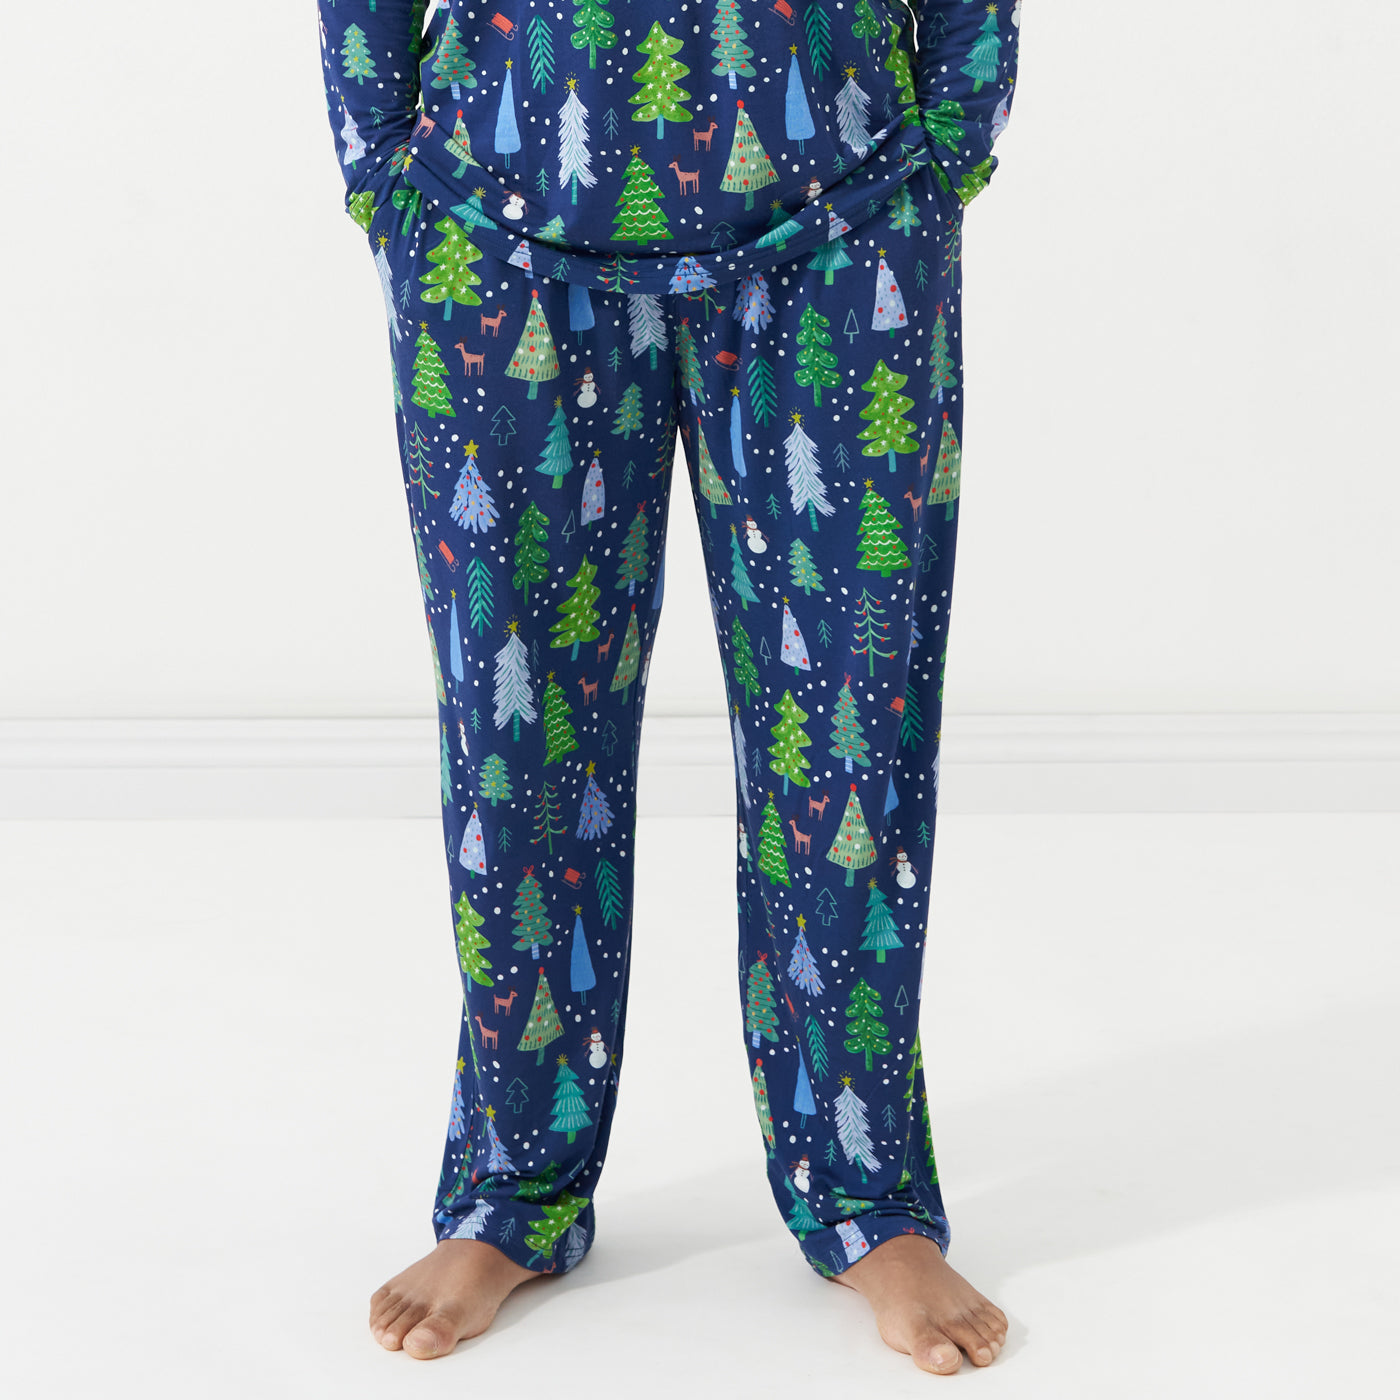 Buy Comfortable Men's Lounge Pants and Pajamas in India